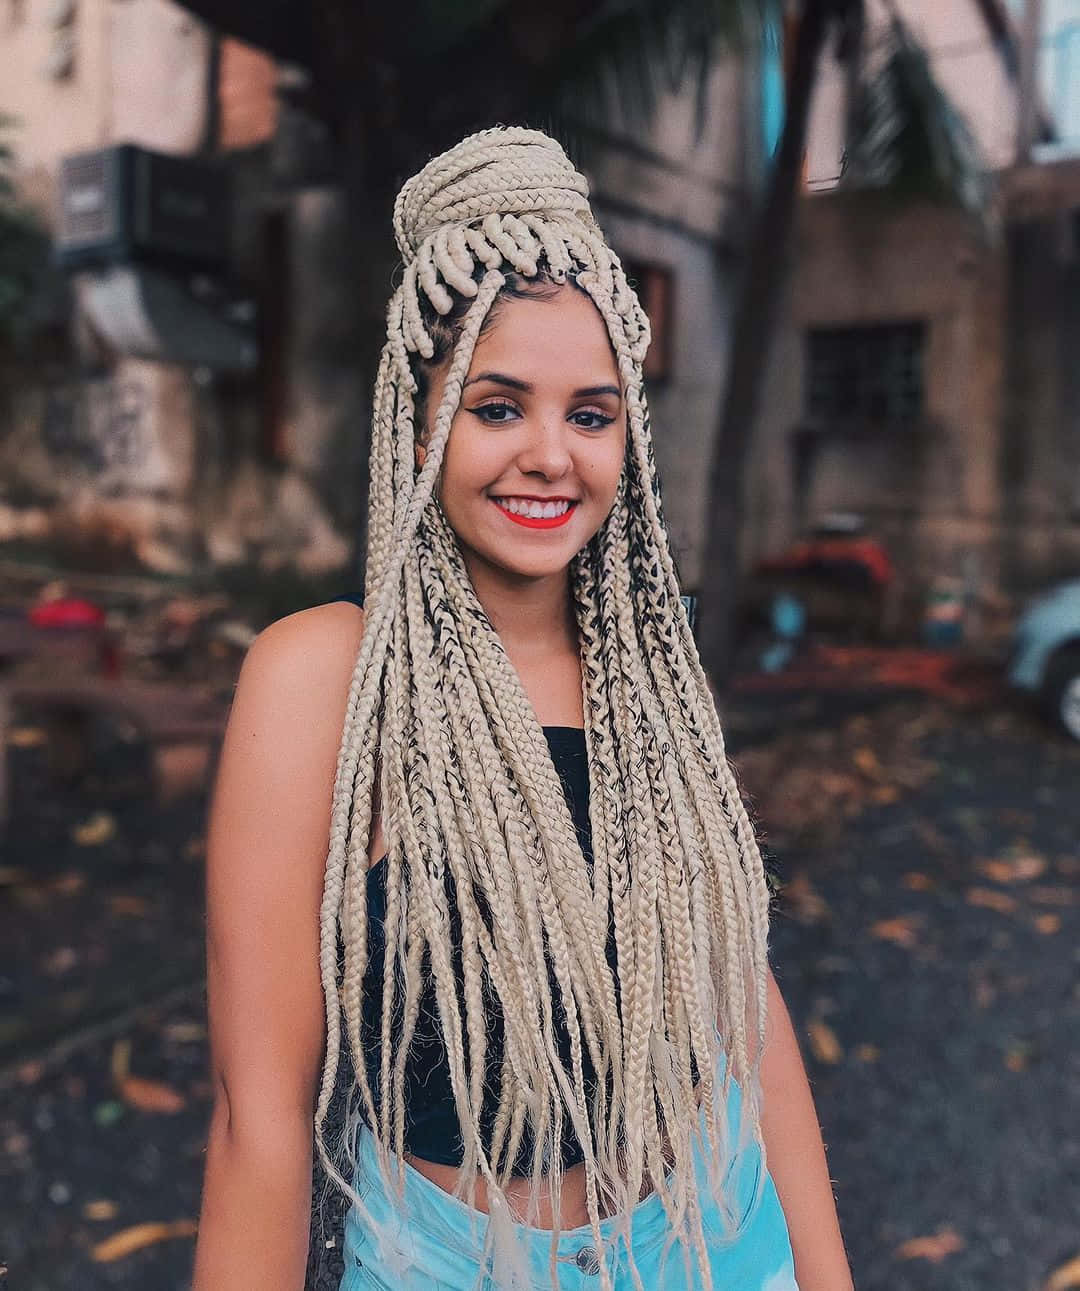 A Woman With Long Braids Posing For A Photo